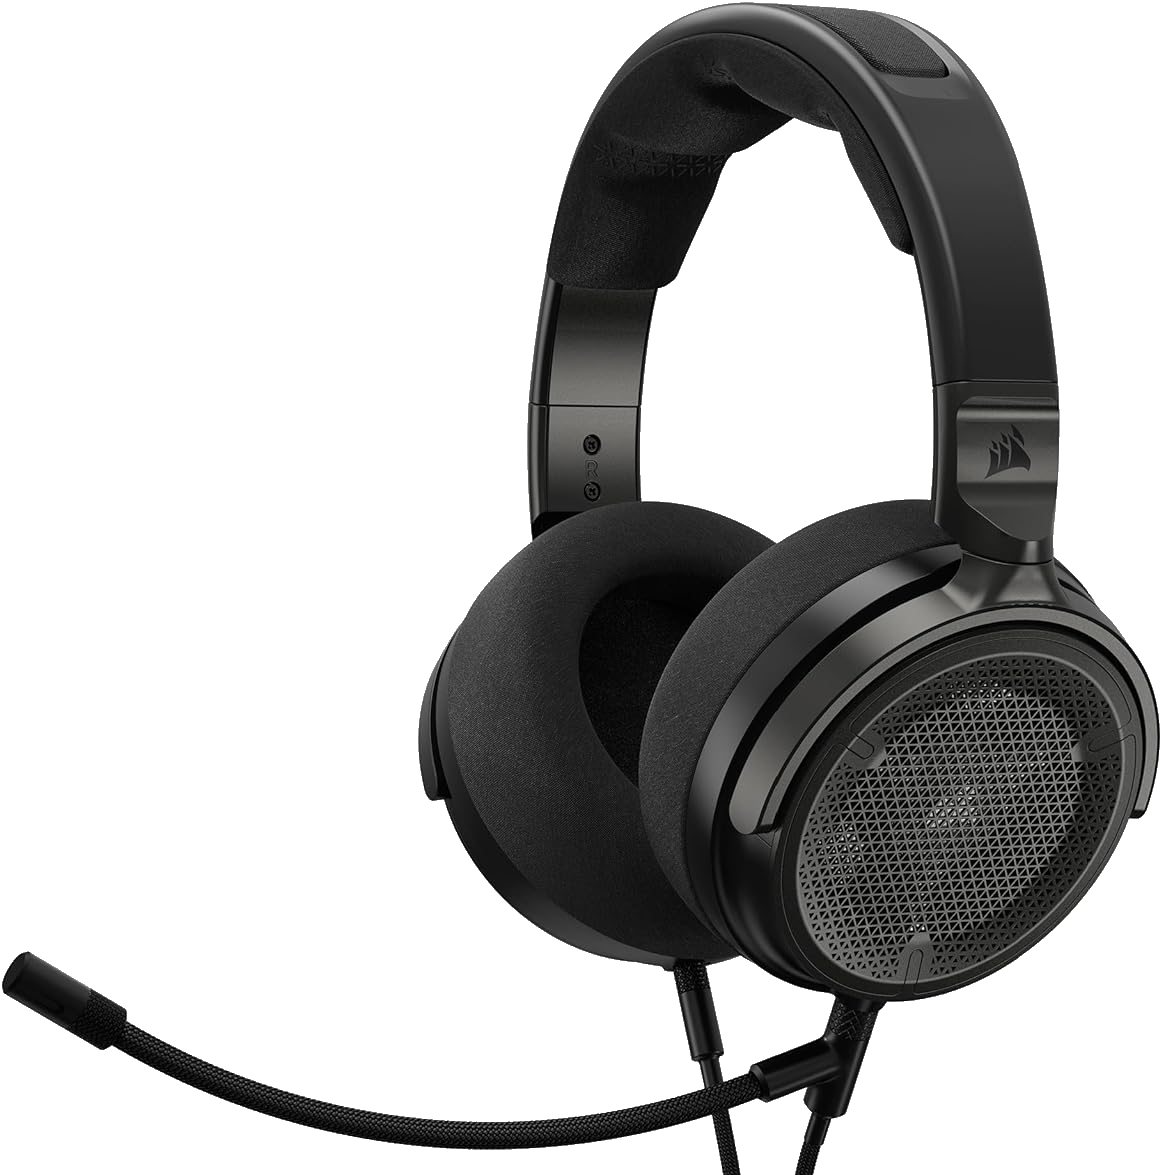 corsair virtuoso pro gaming headset with detachable microphone